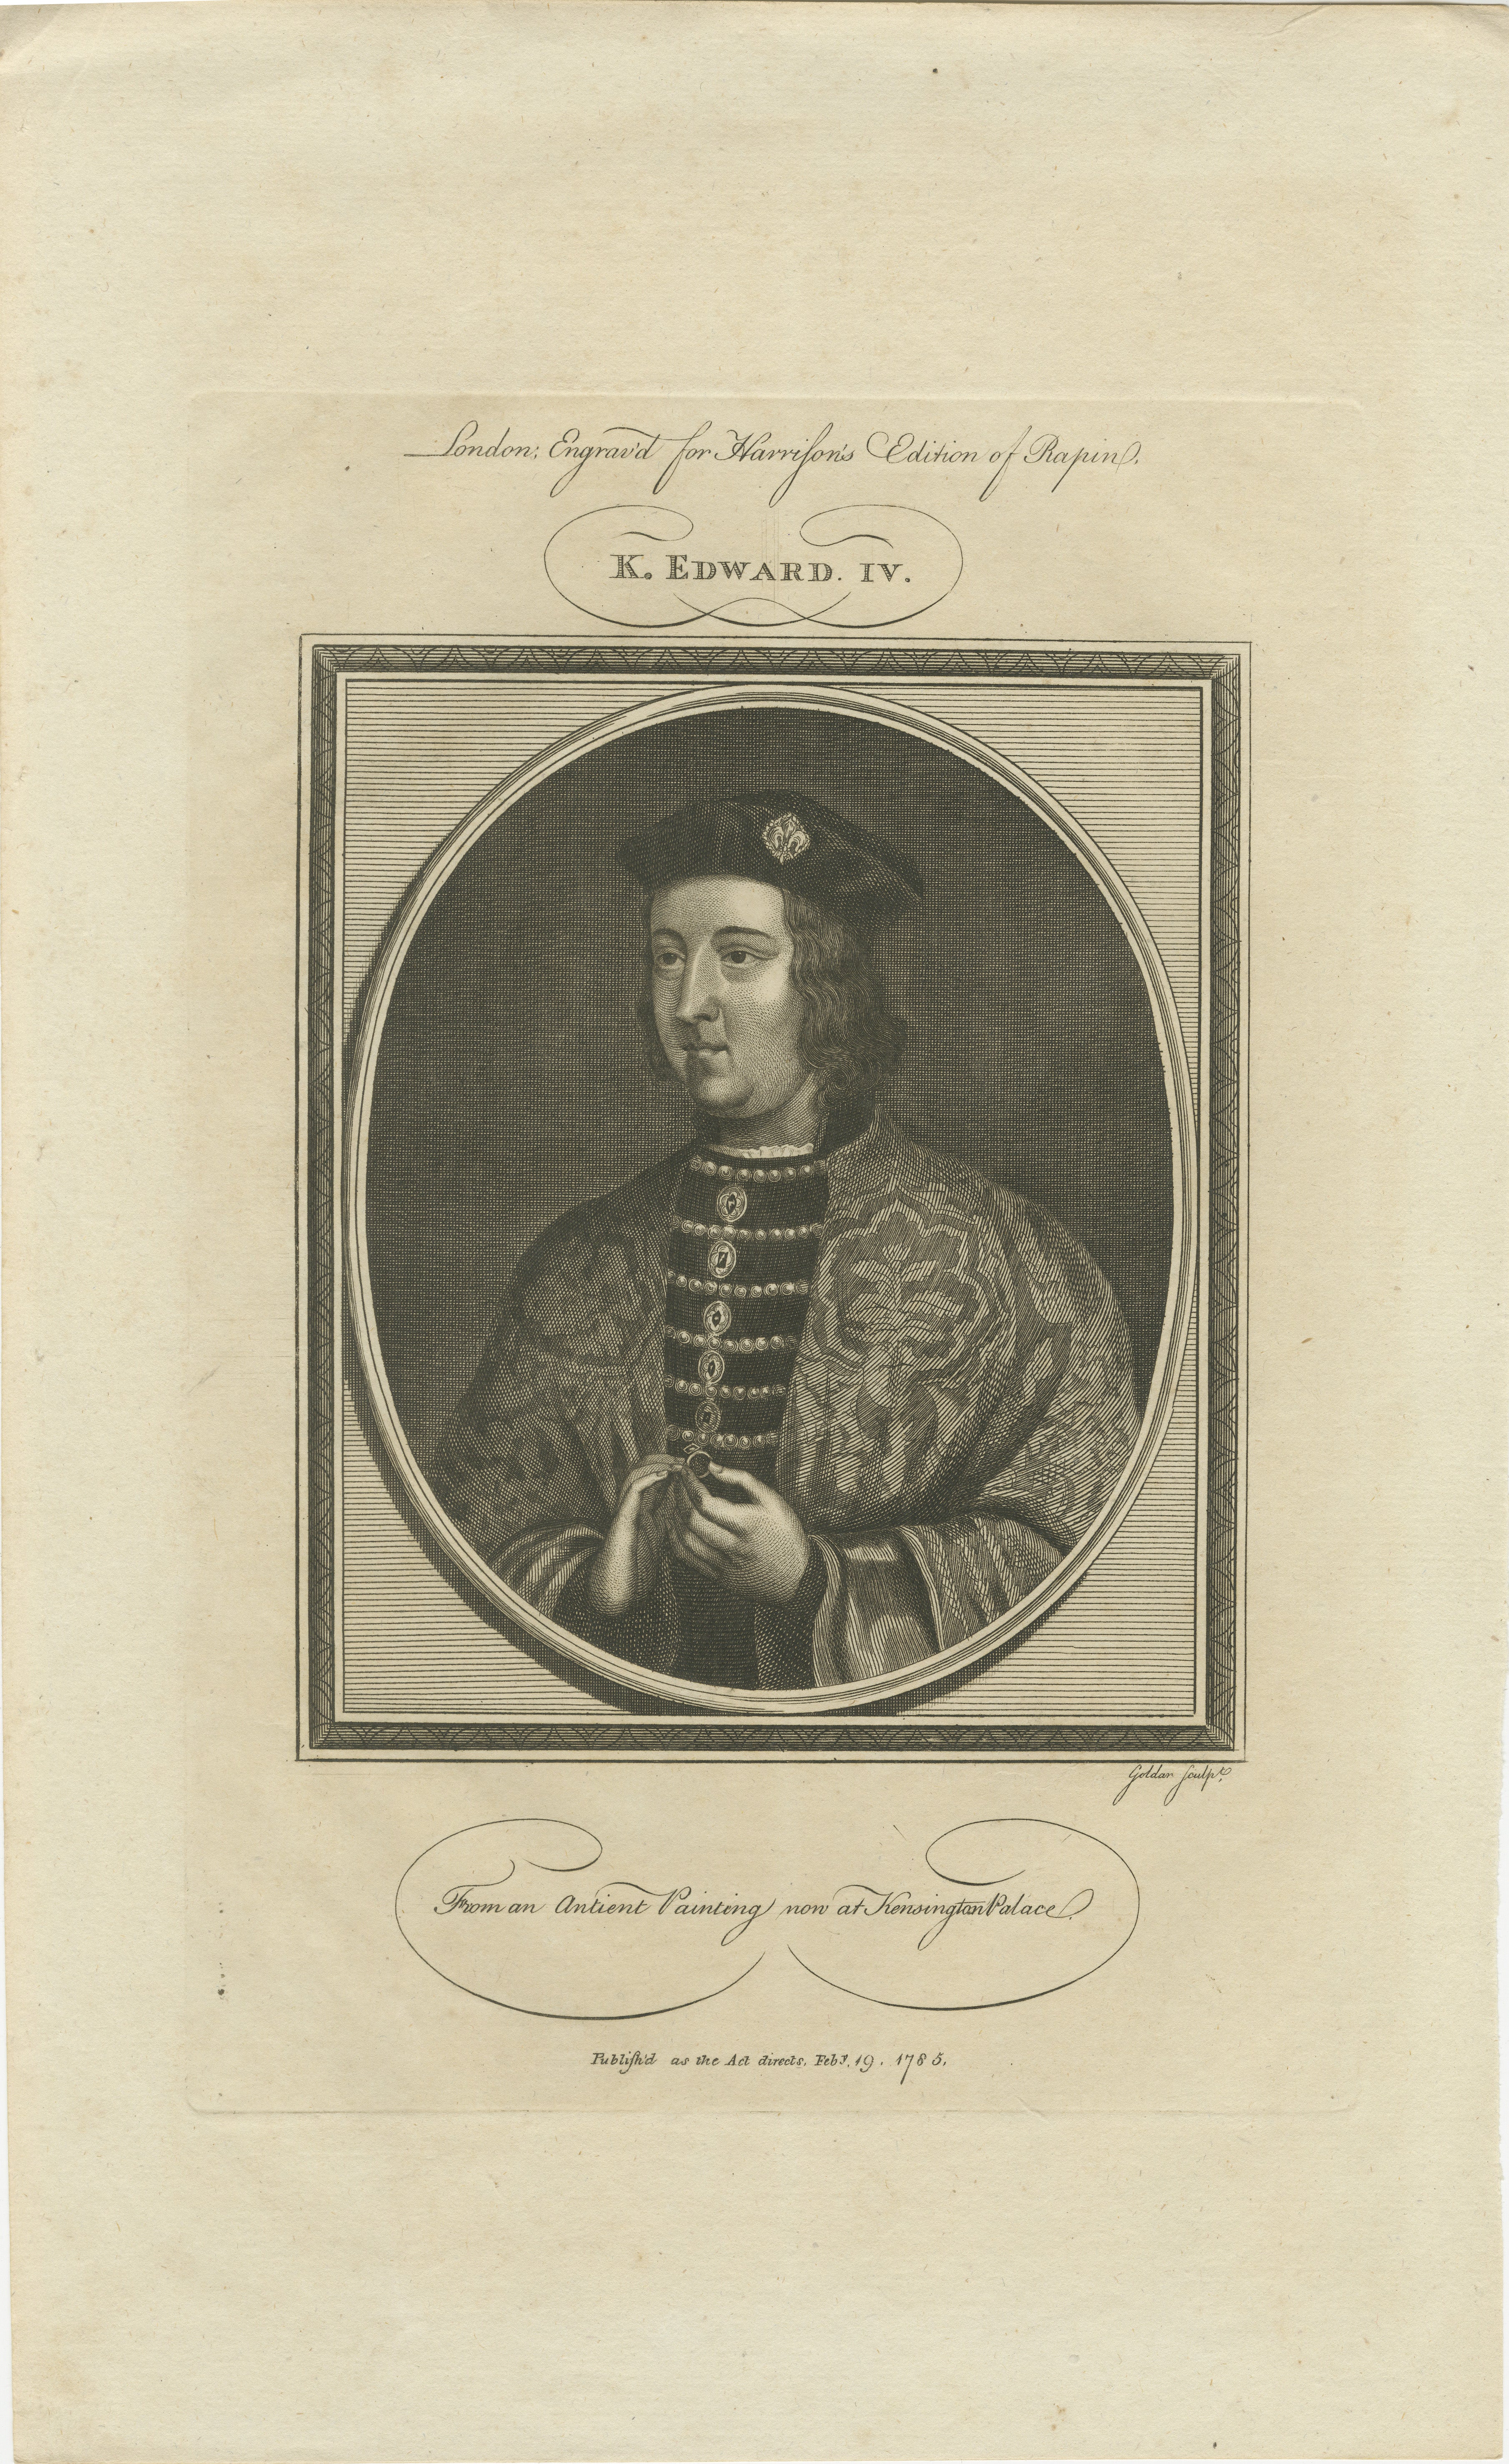 The image is an original engraved portrait, depicting King Edward IV of England. This engraving was created for 